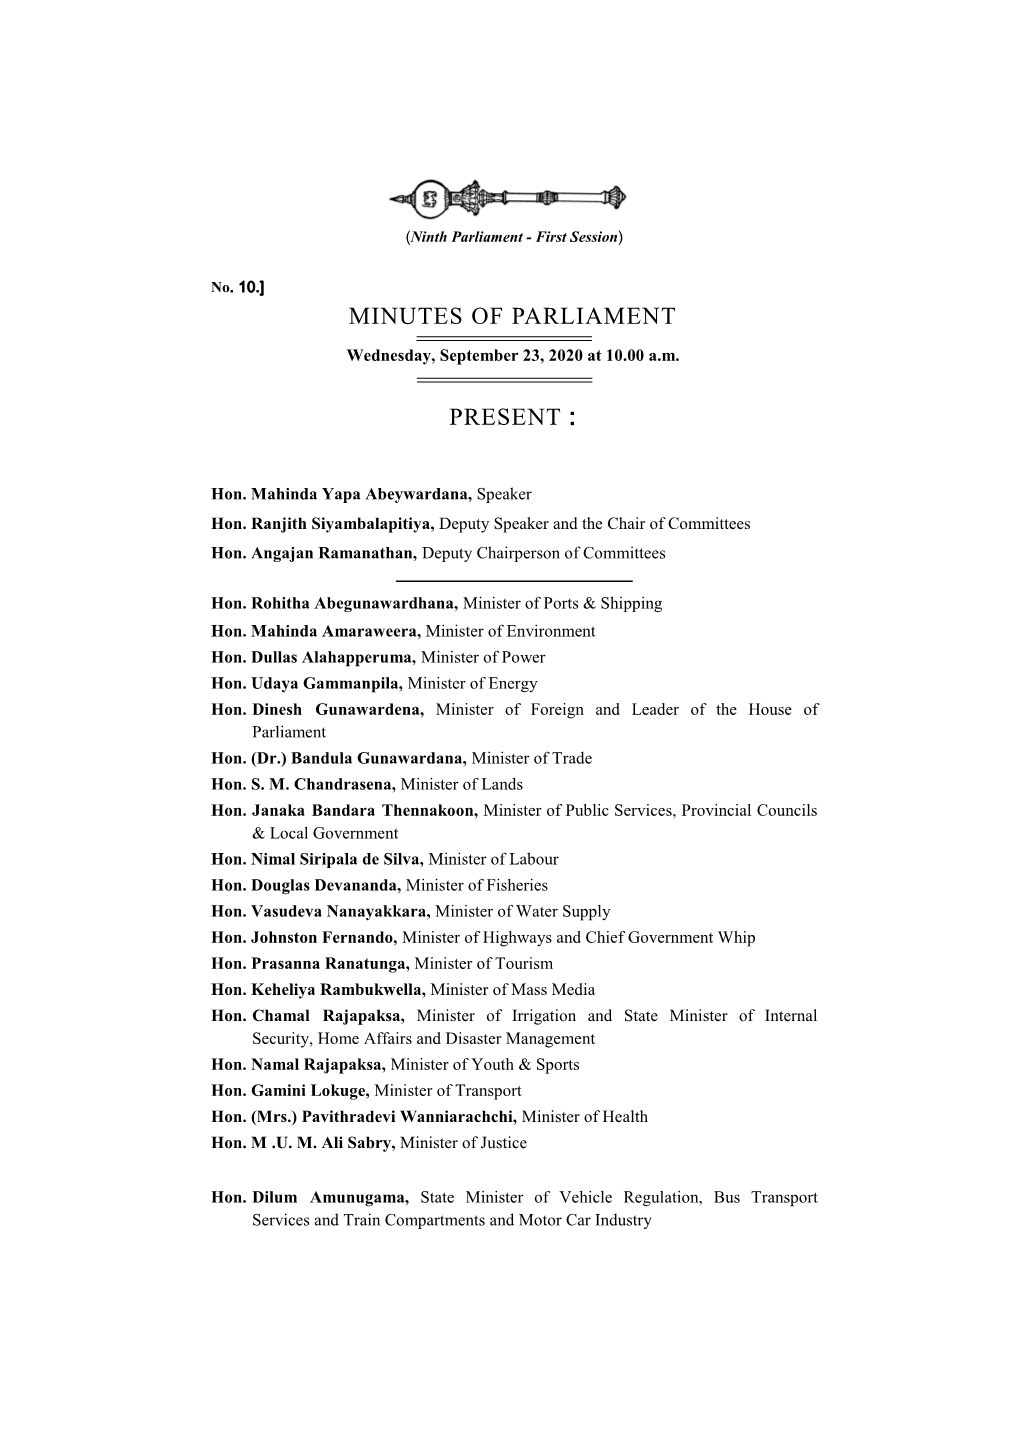 Minutes of Parliament for 23.09.2020